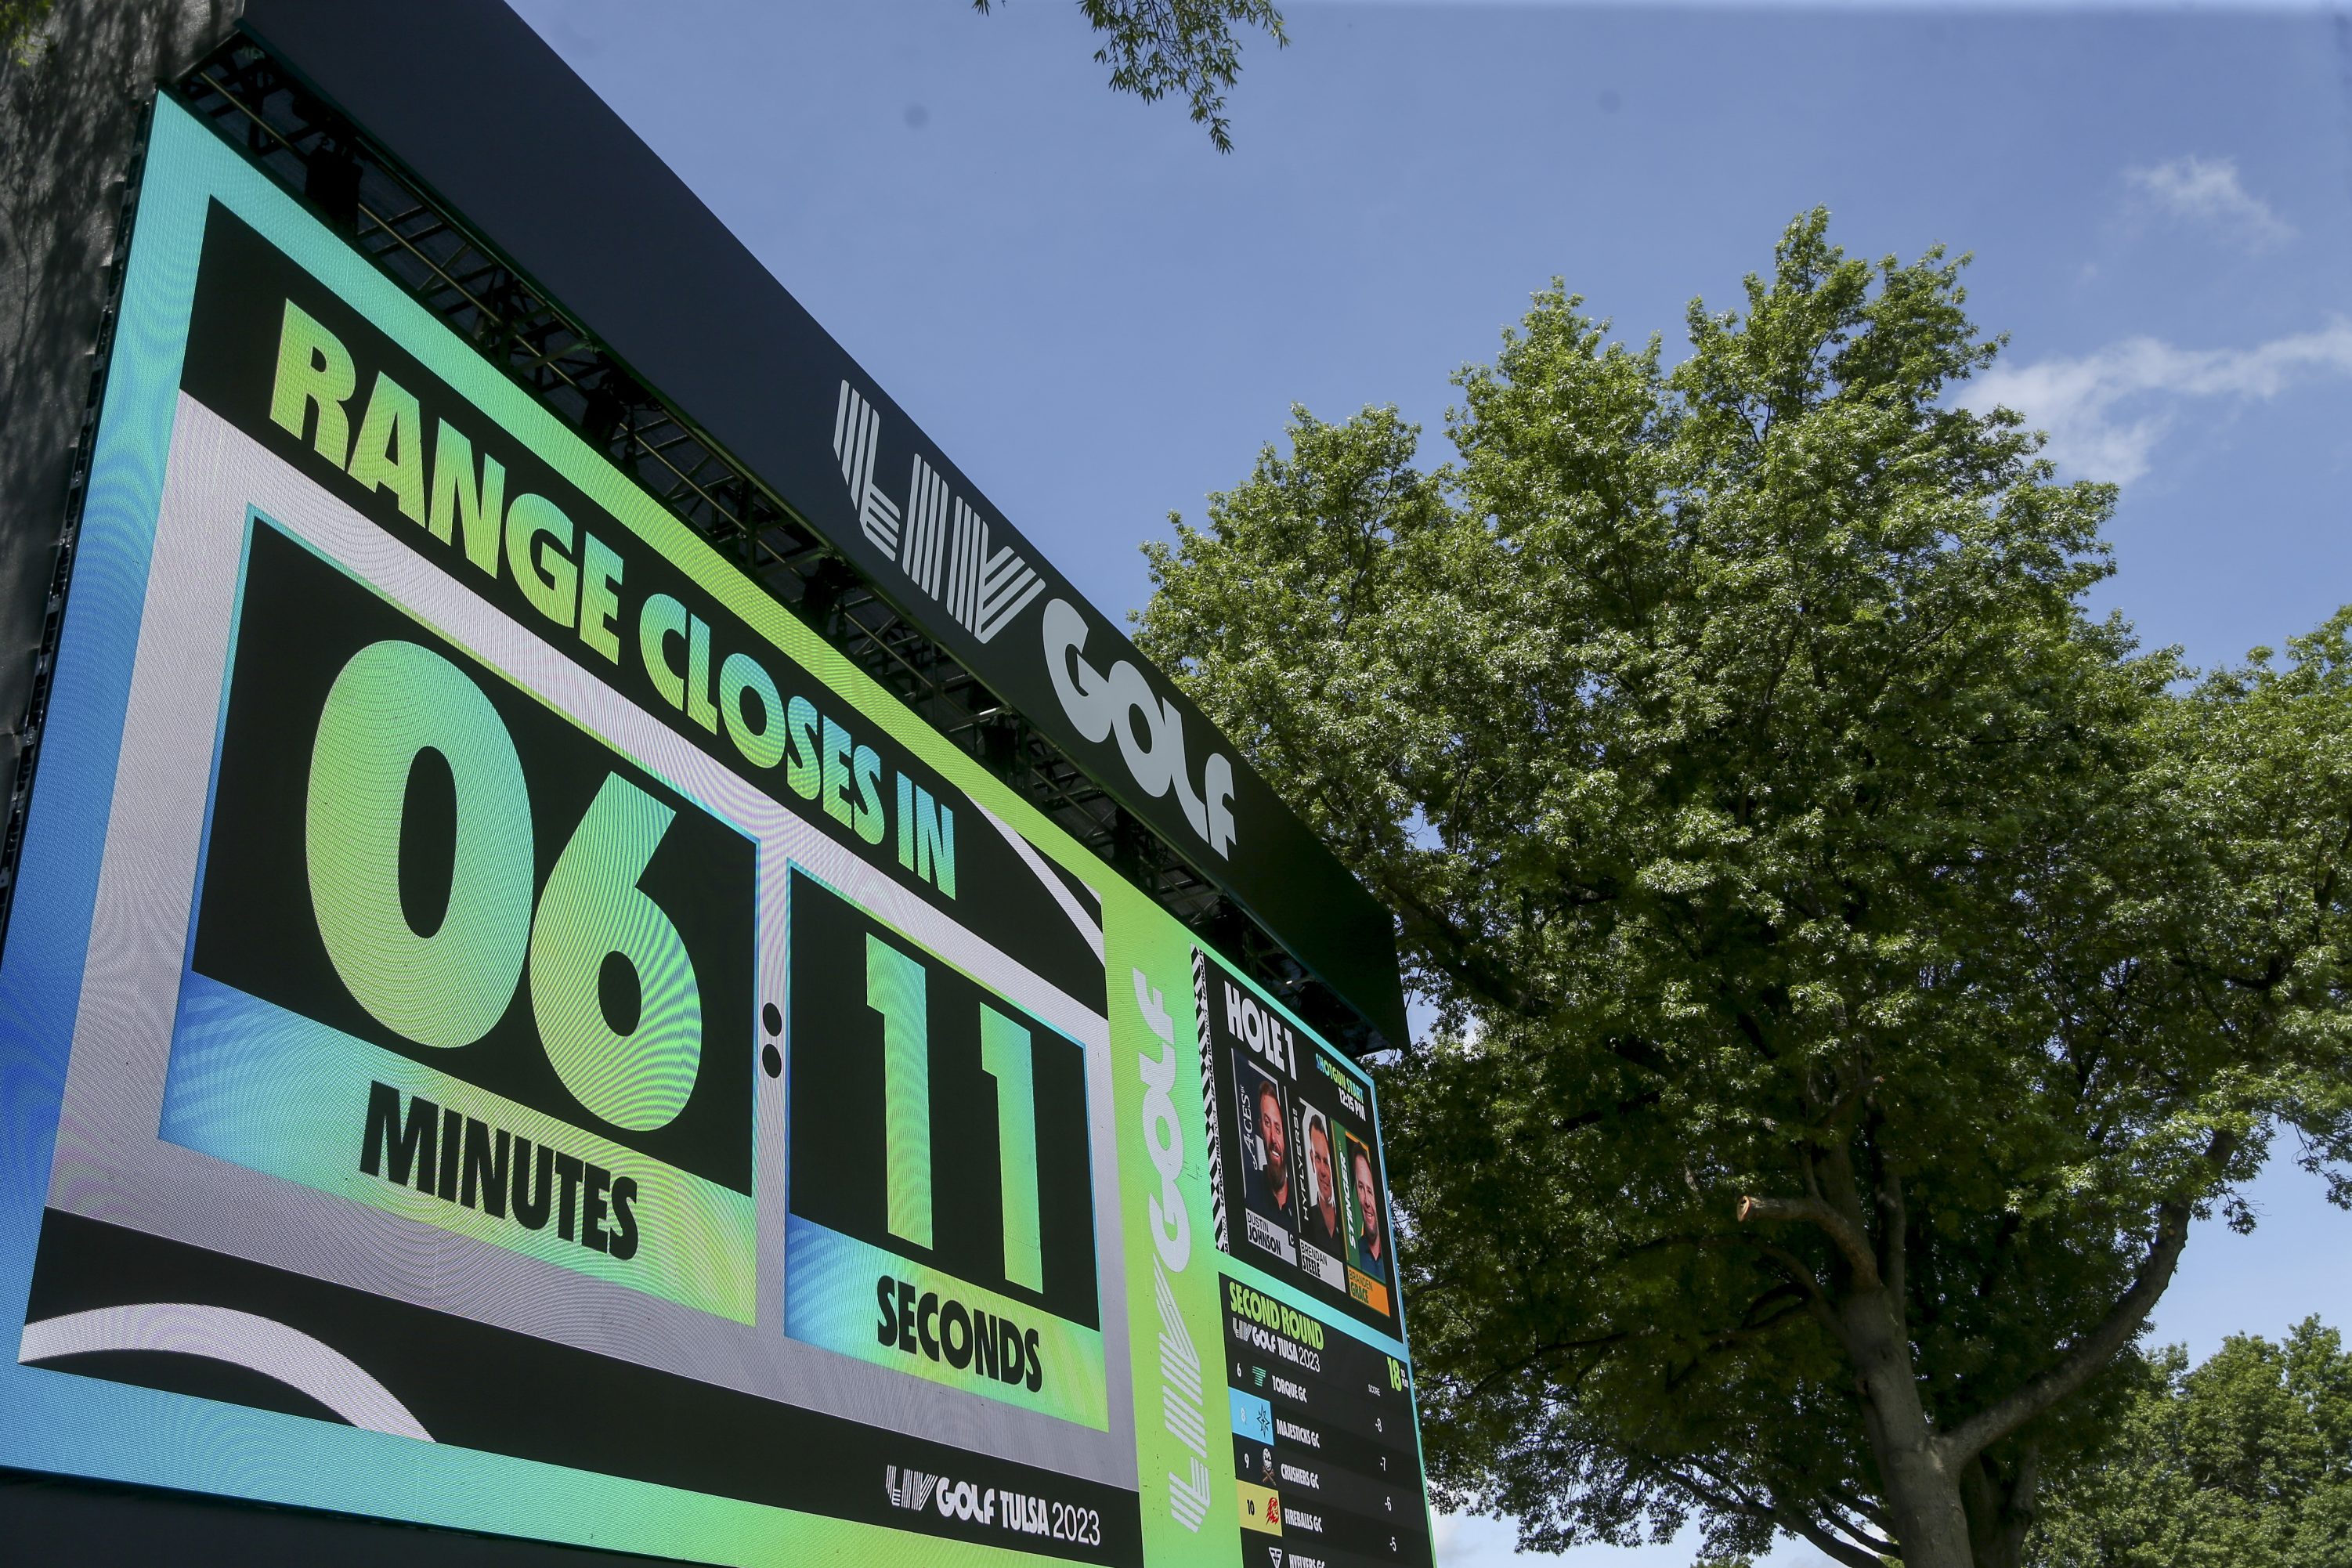 A scoreboard at the LIV Golf event at Broken Arrow, Oklahoma on May 13.